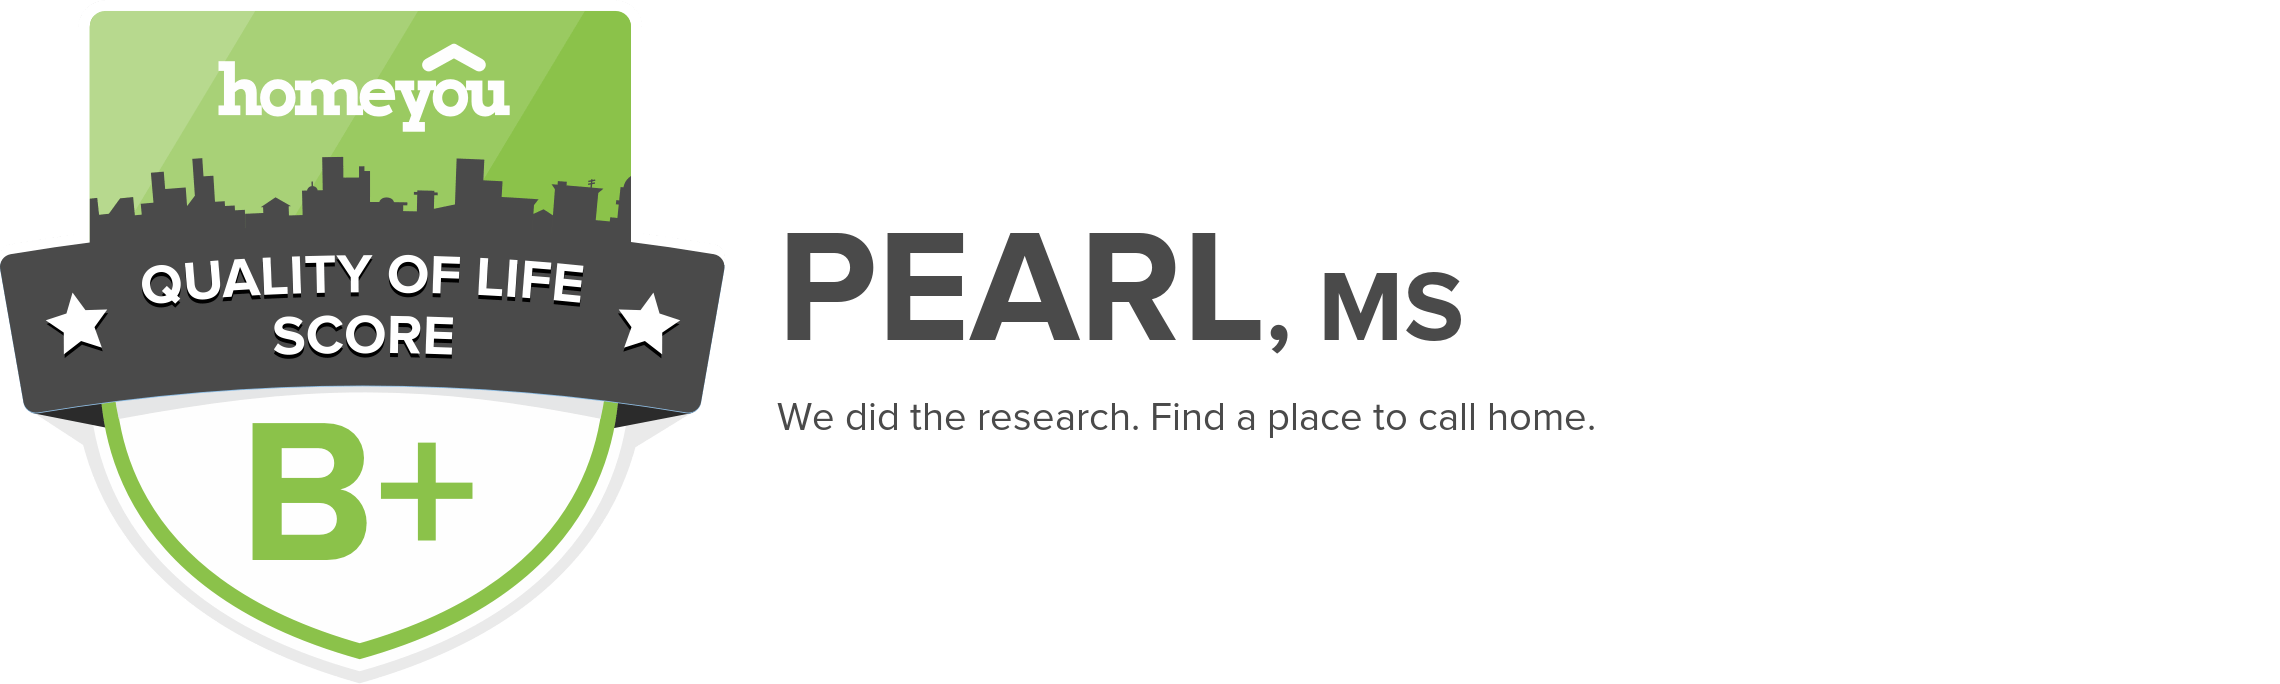 Pearl, MS